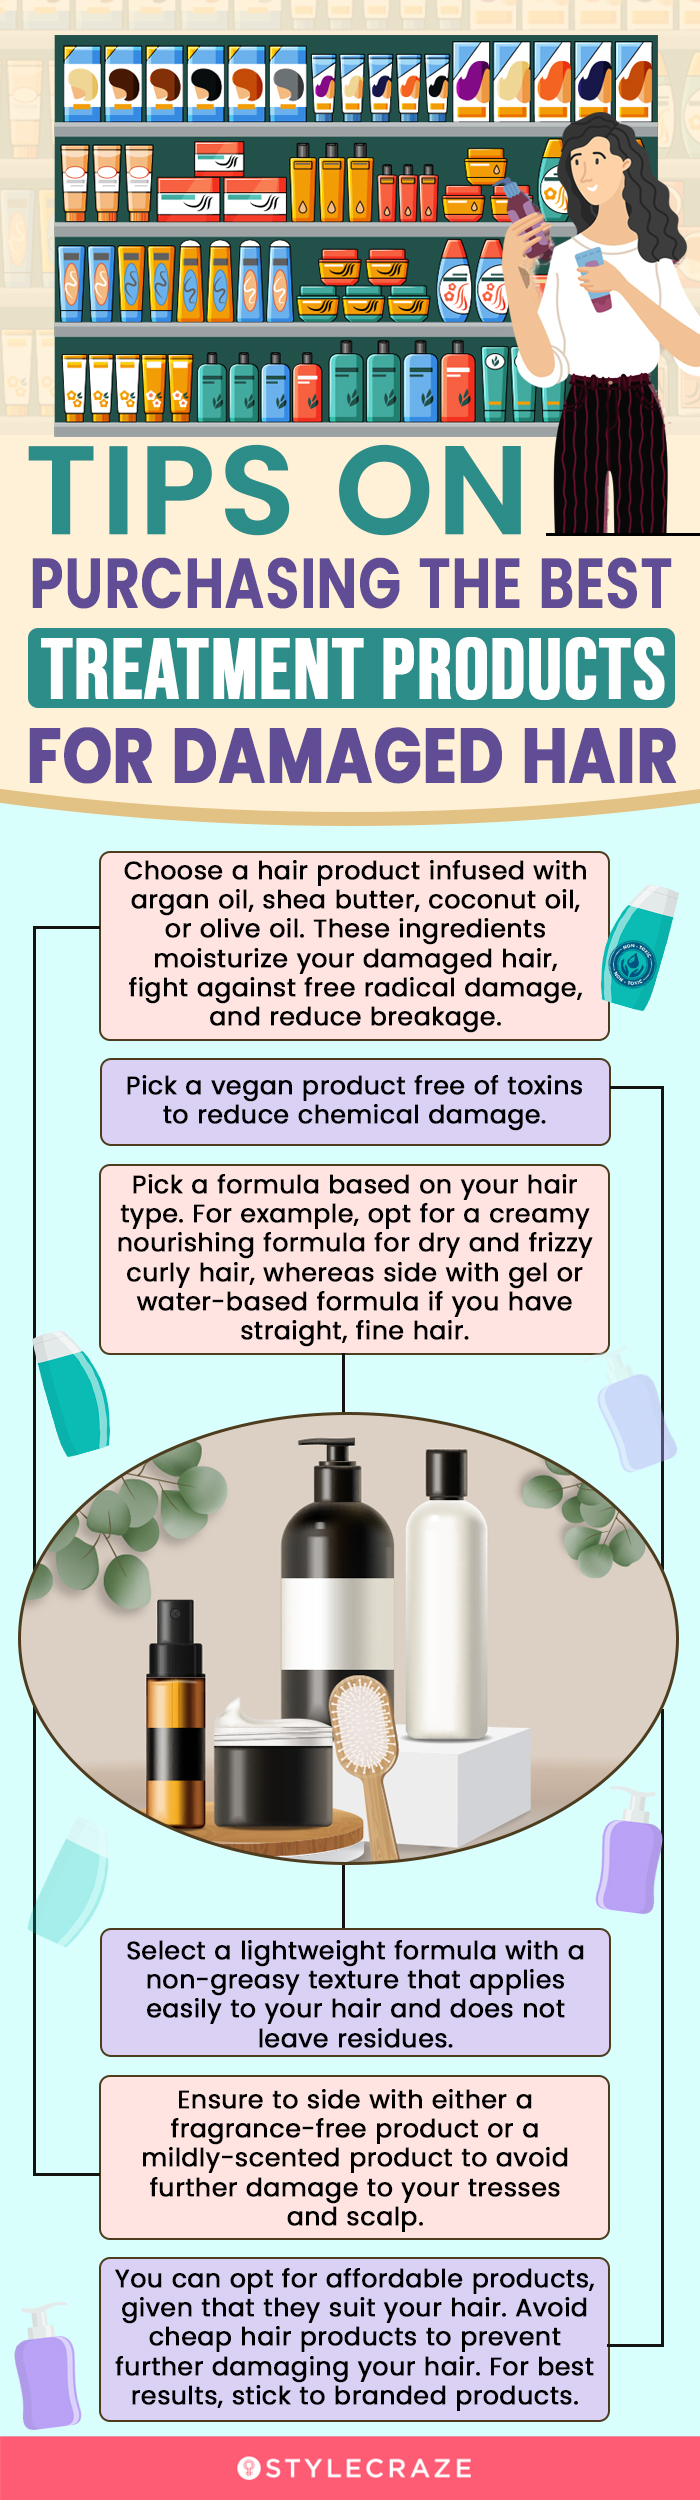 Tips On Purchasing The Best Treatment Products For Damaged Hair (infographic)